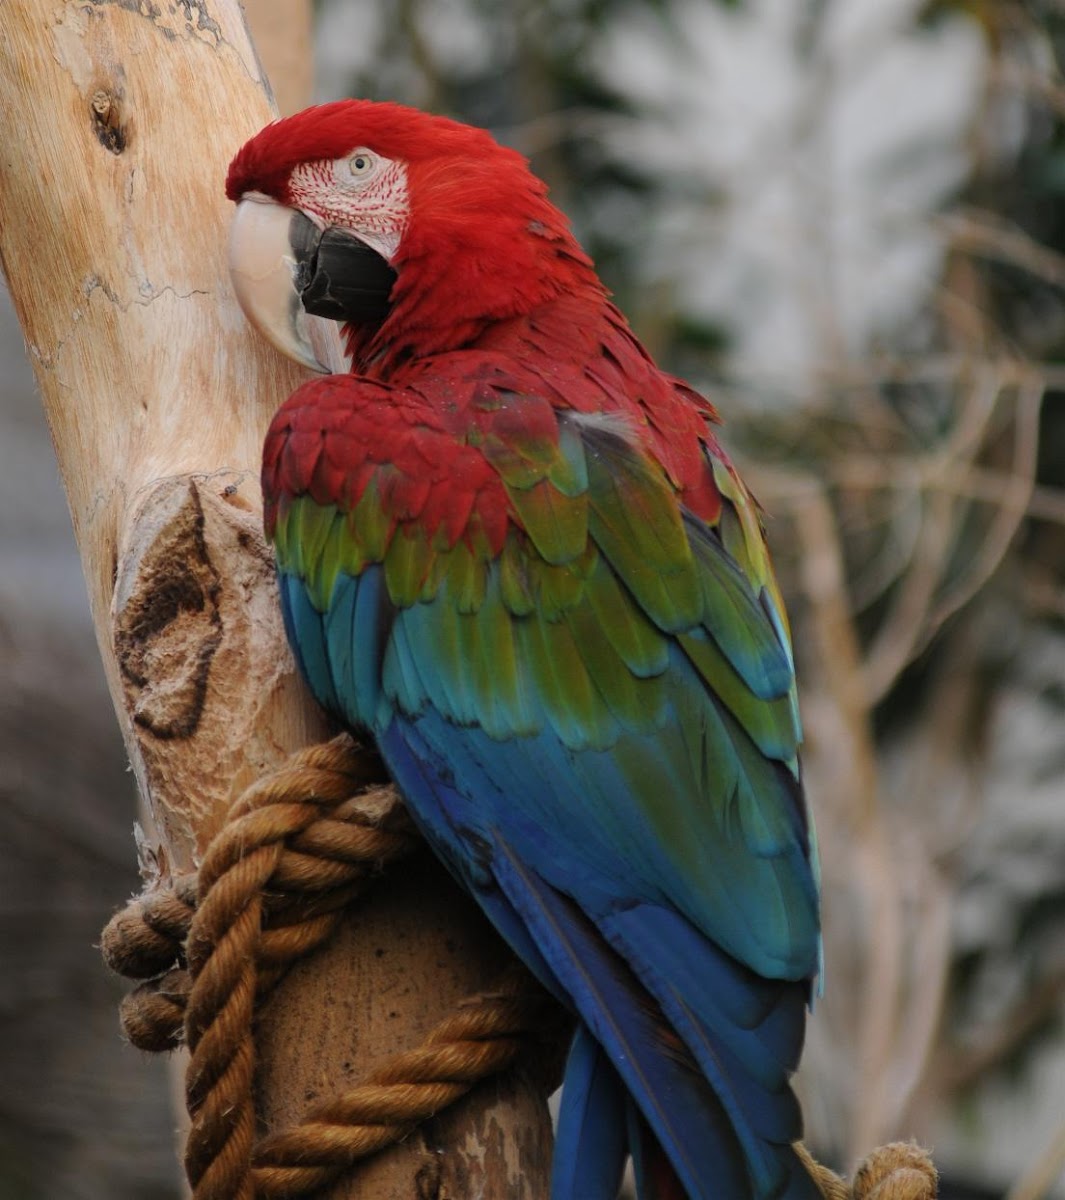 Green-winged macaw